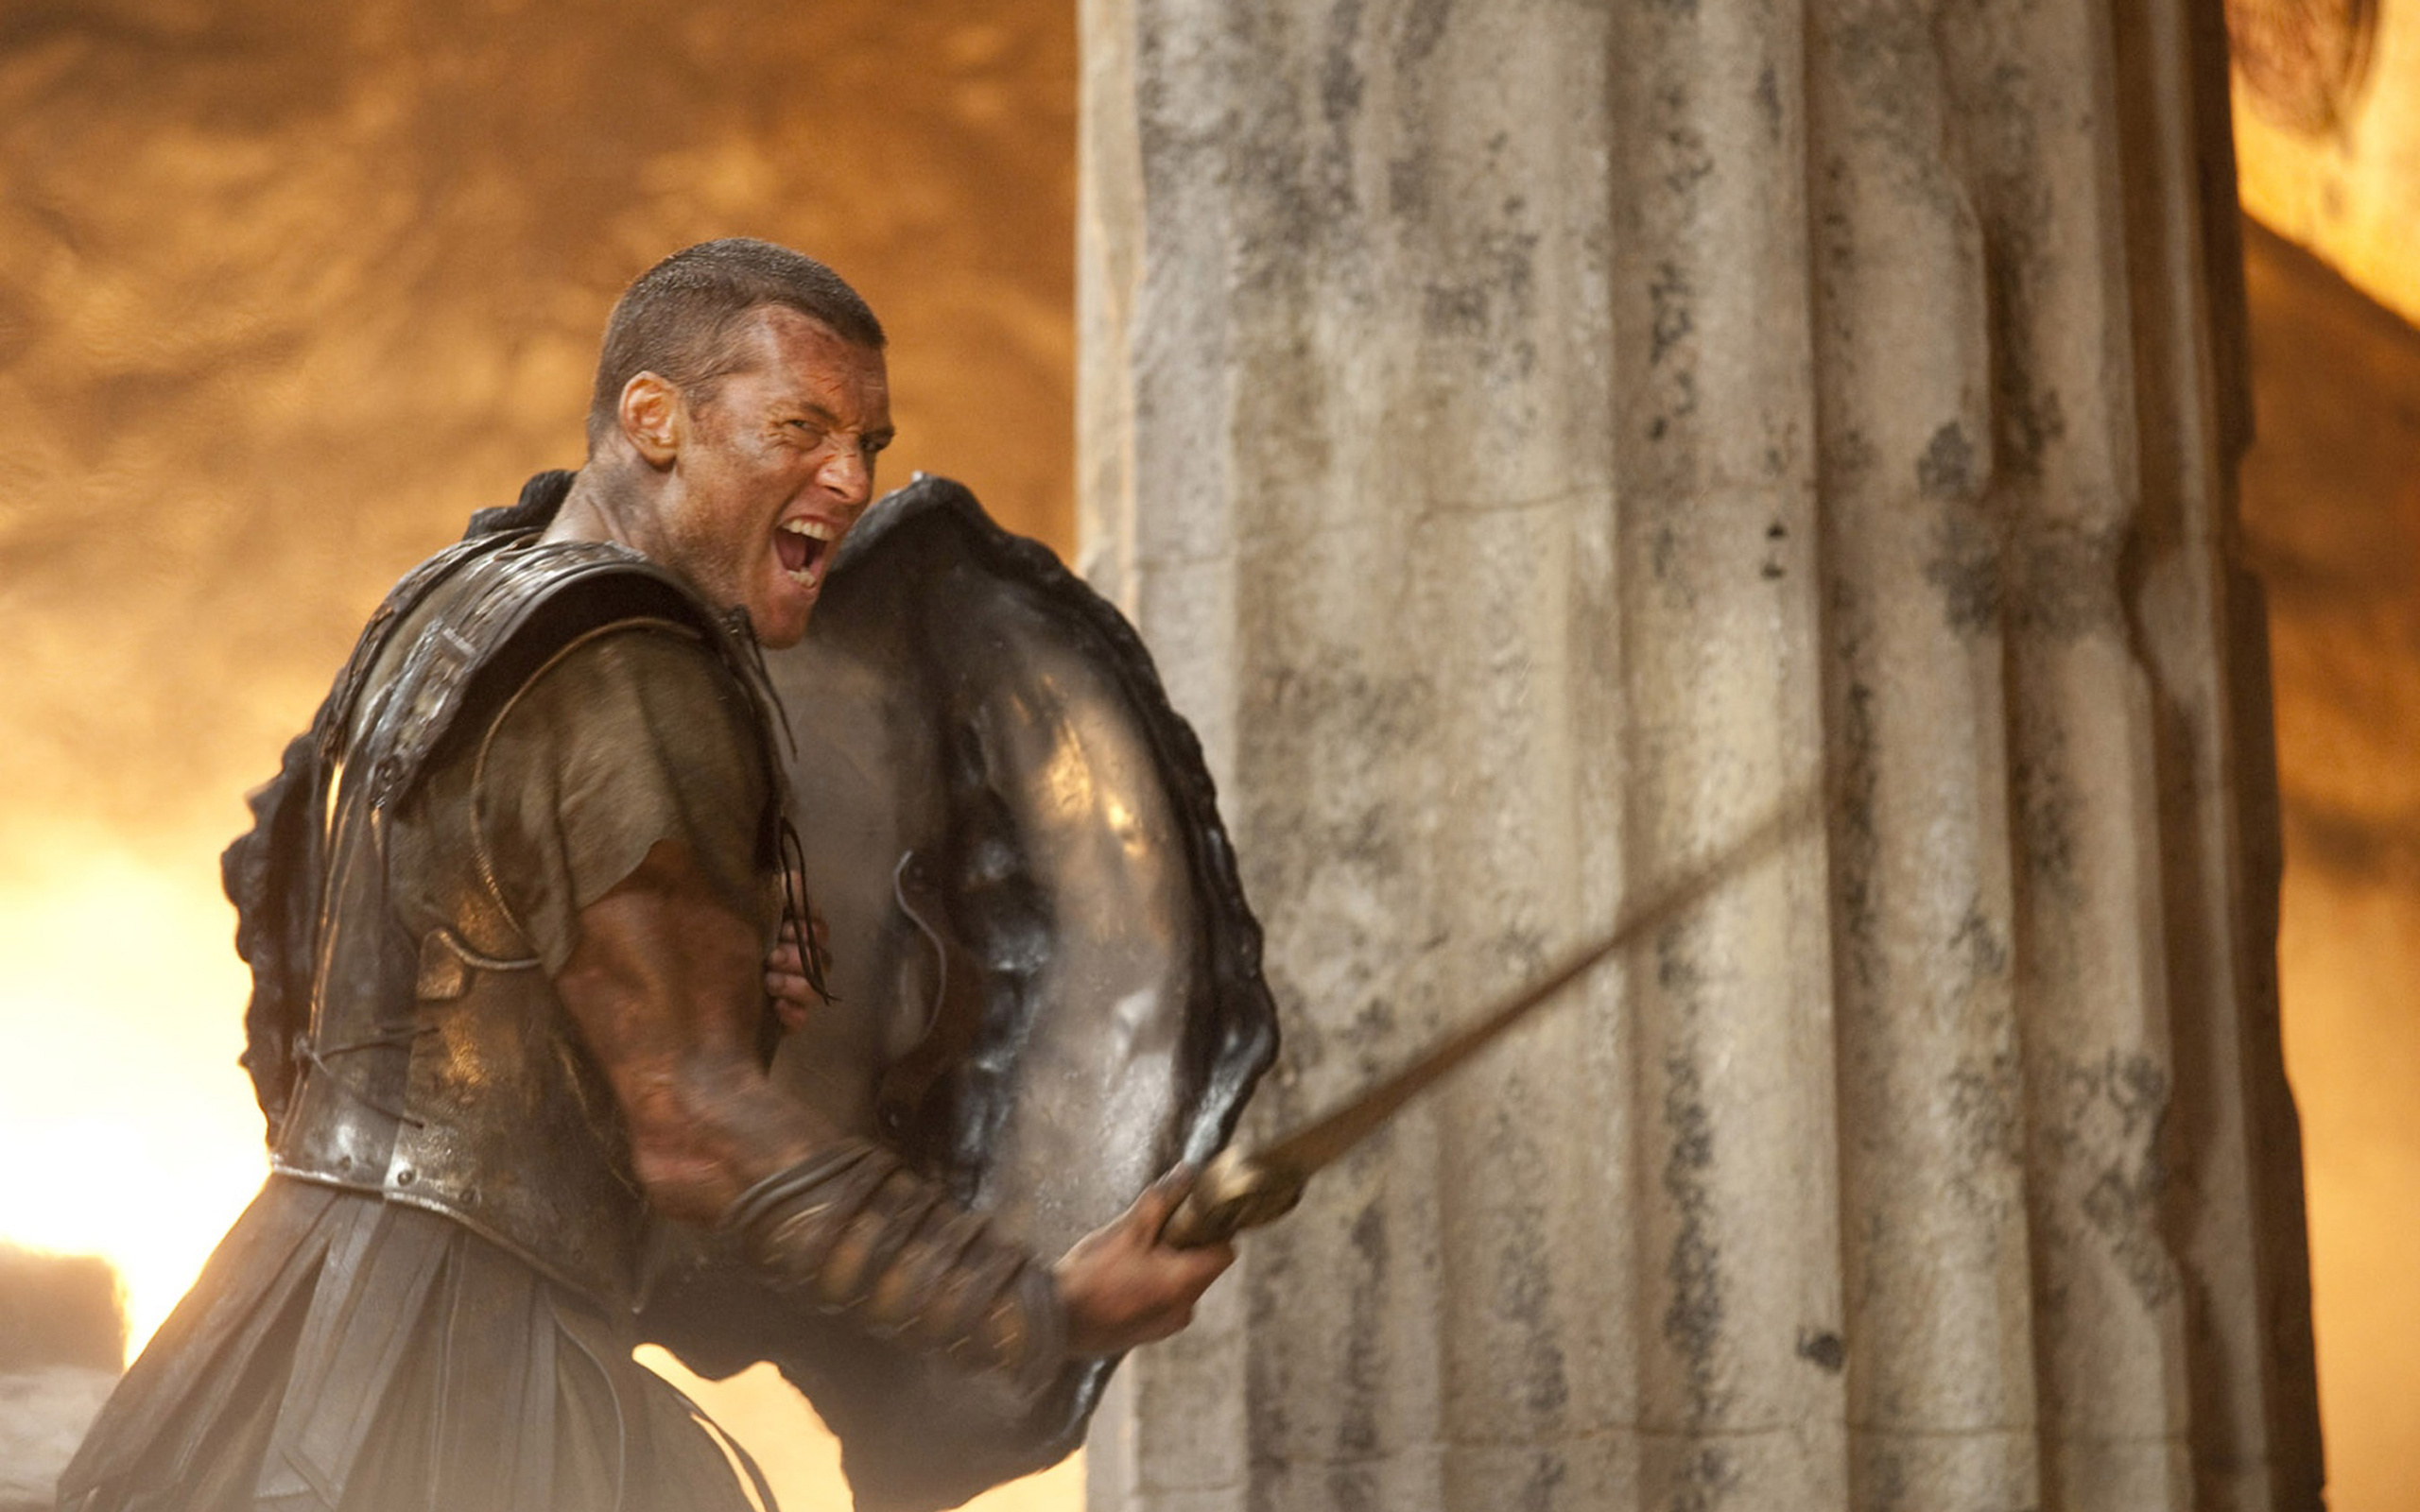 Sam Worthington: Perseus in Clash of the Titans and its sequel Wrath of the Titans. 2560x1600 HD Wallpaper.